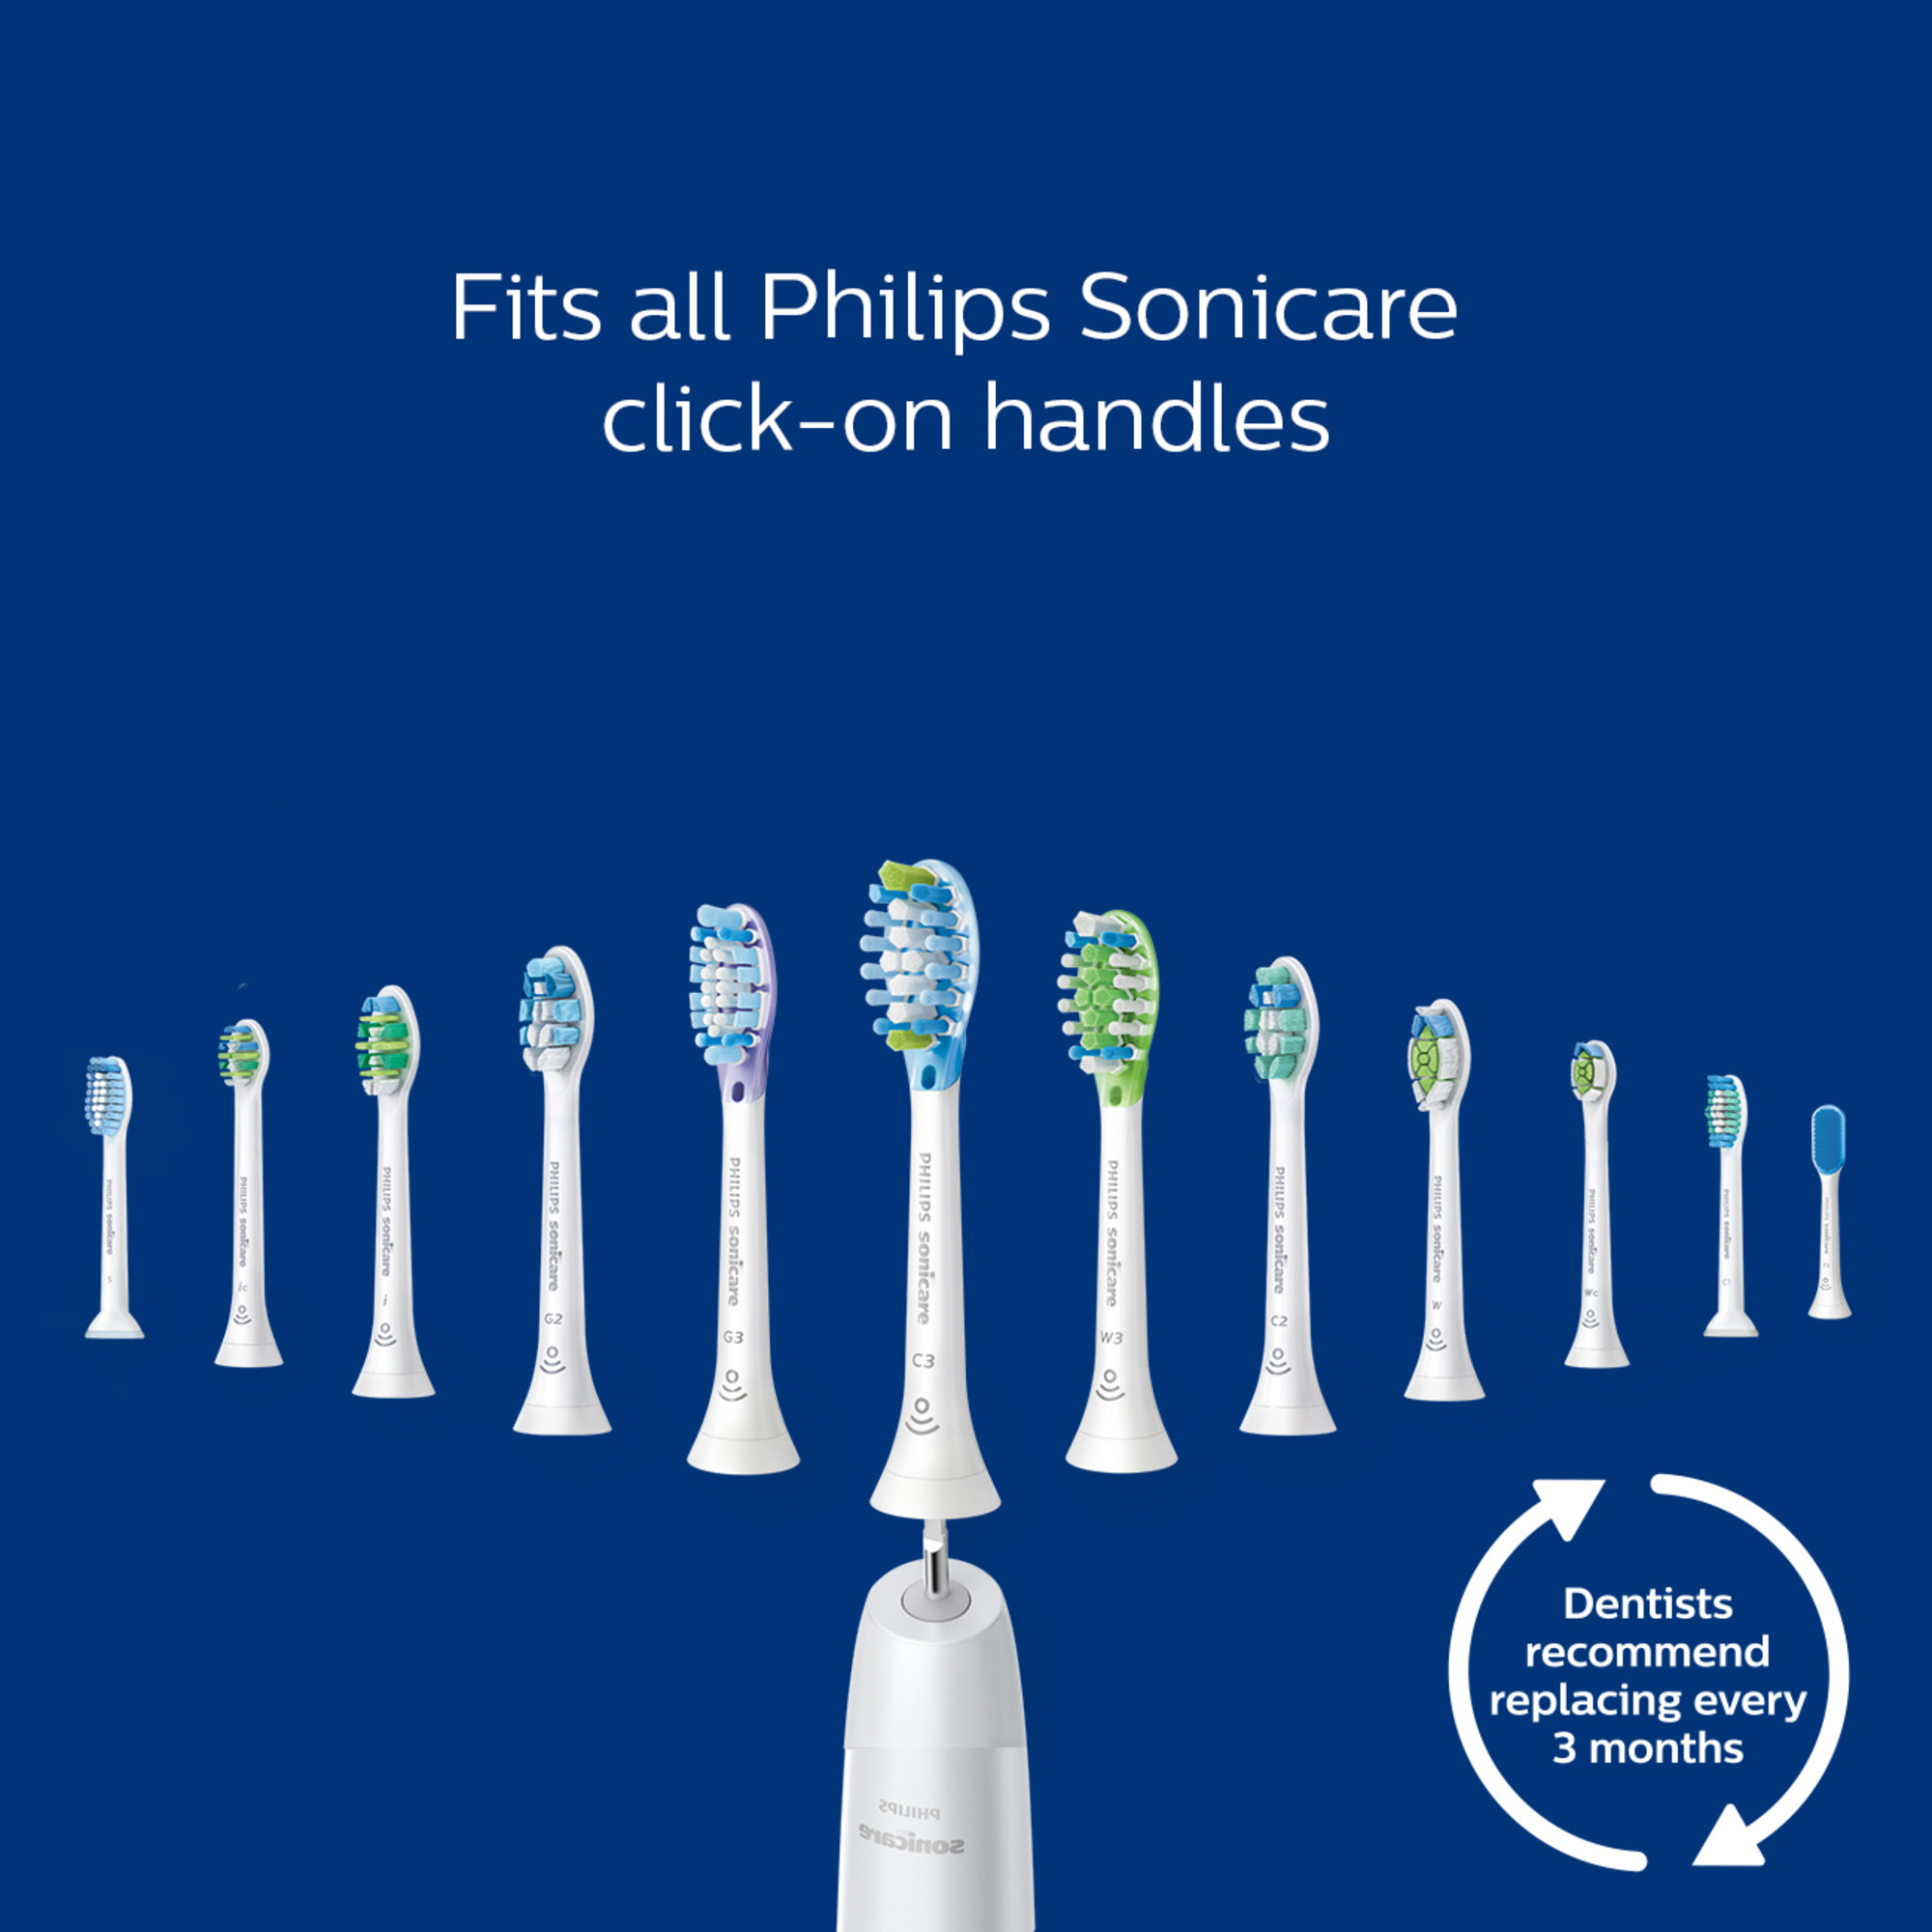 Philips Sonicare ExpertClean 7300, Rechargeable Electric Toothbrush, Black HX9610/17 - image 15 of 19